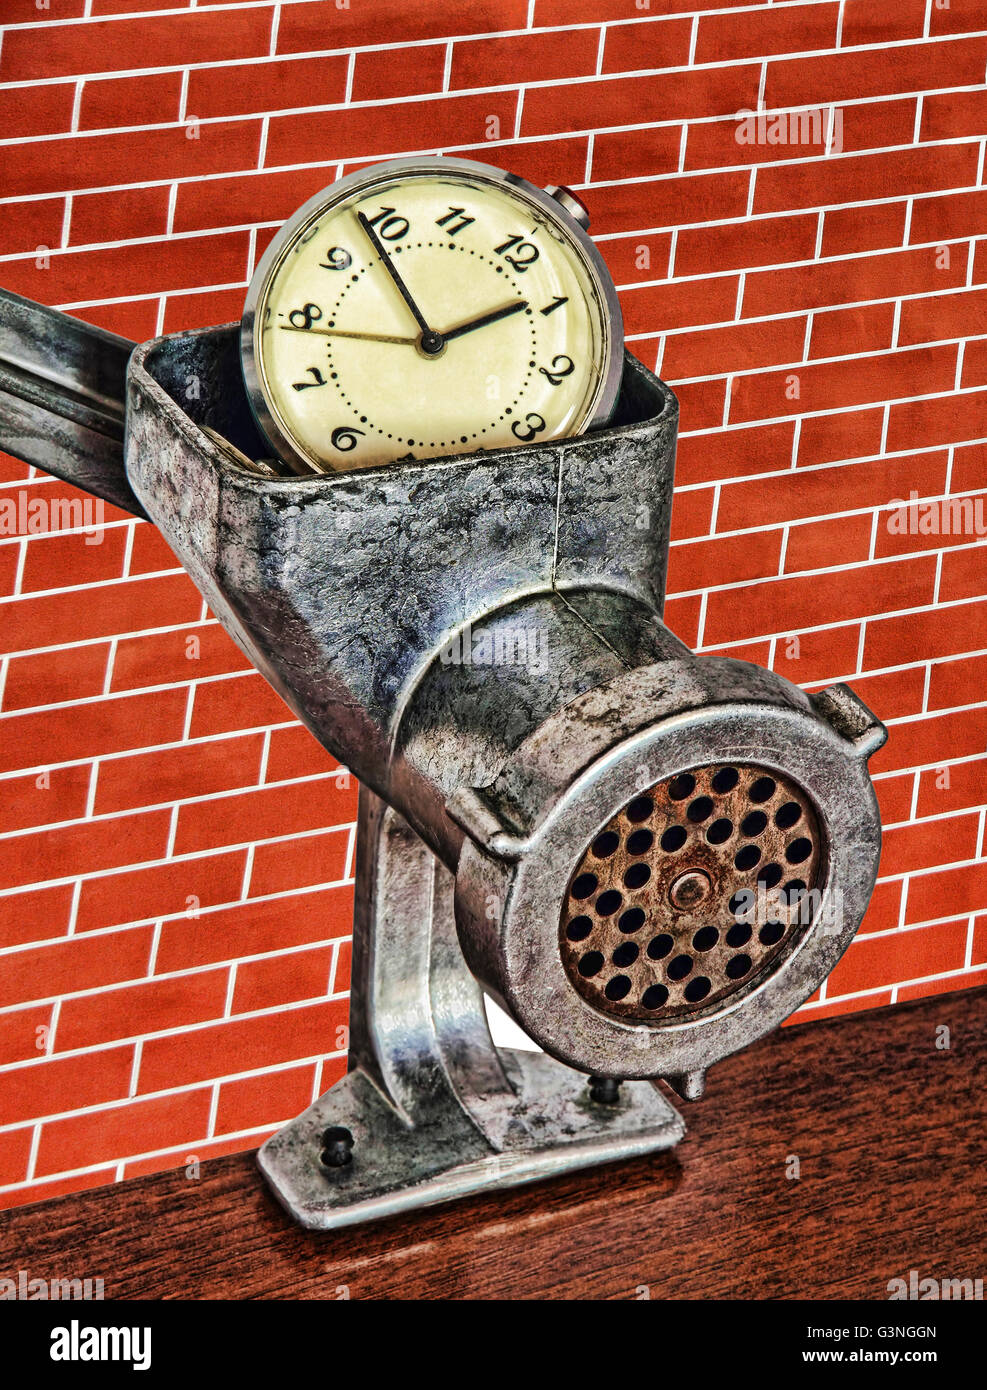 Alarm clock in meat grinder on red brick wall background taken closeup. Stock Photo